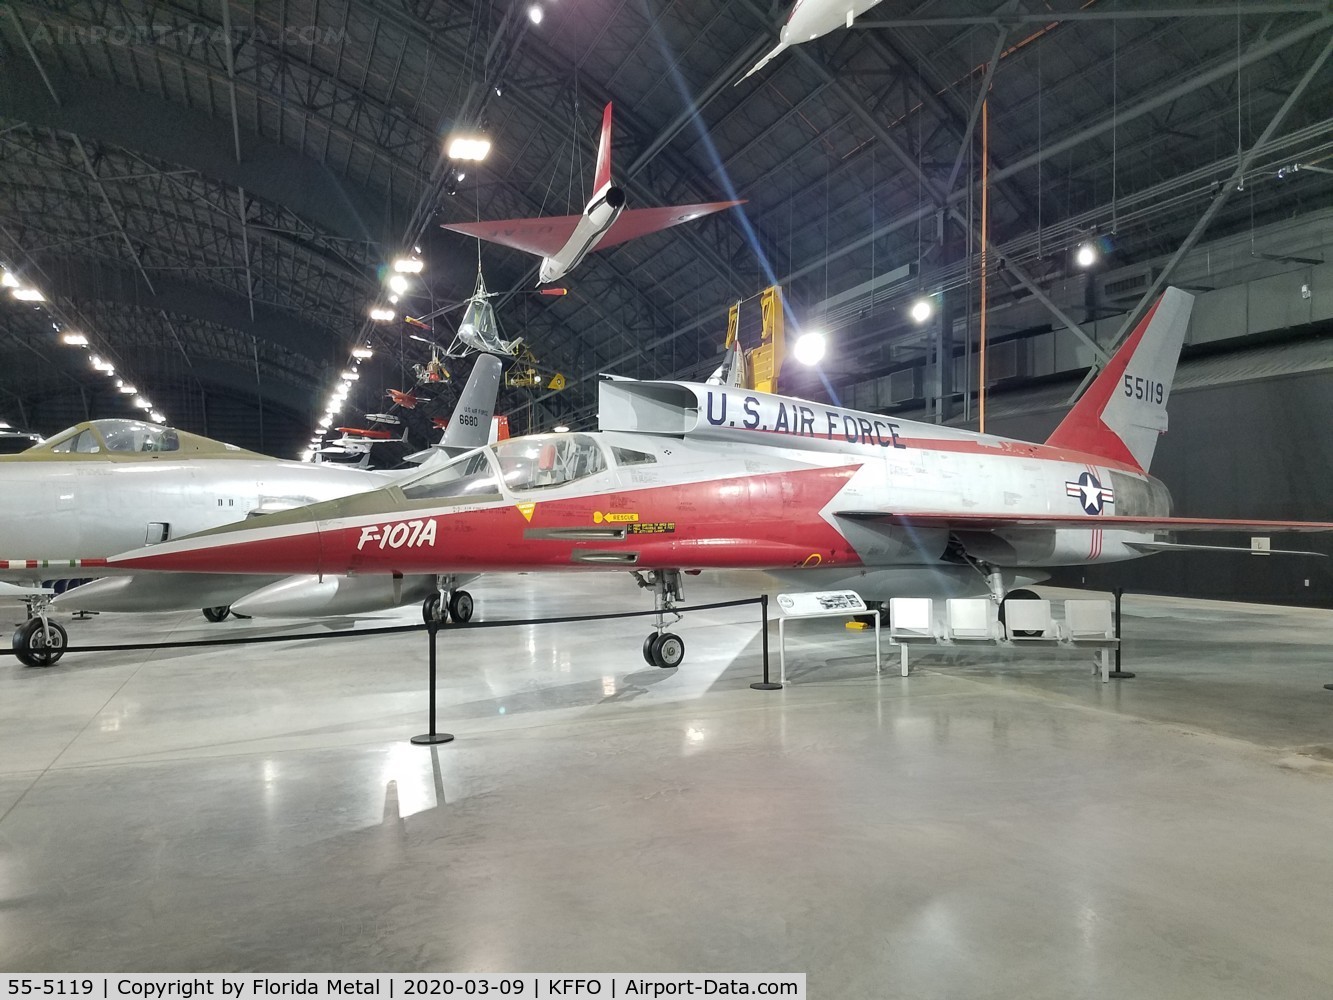 55-5119, 1955 North American F-107A C/N 212-2, Air Force Museum 2020